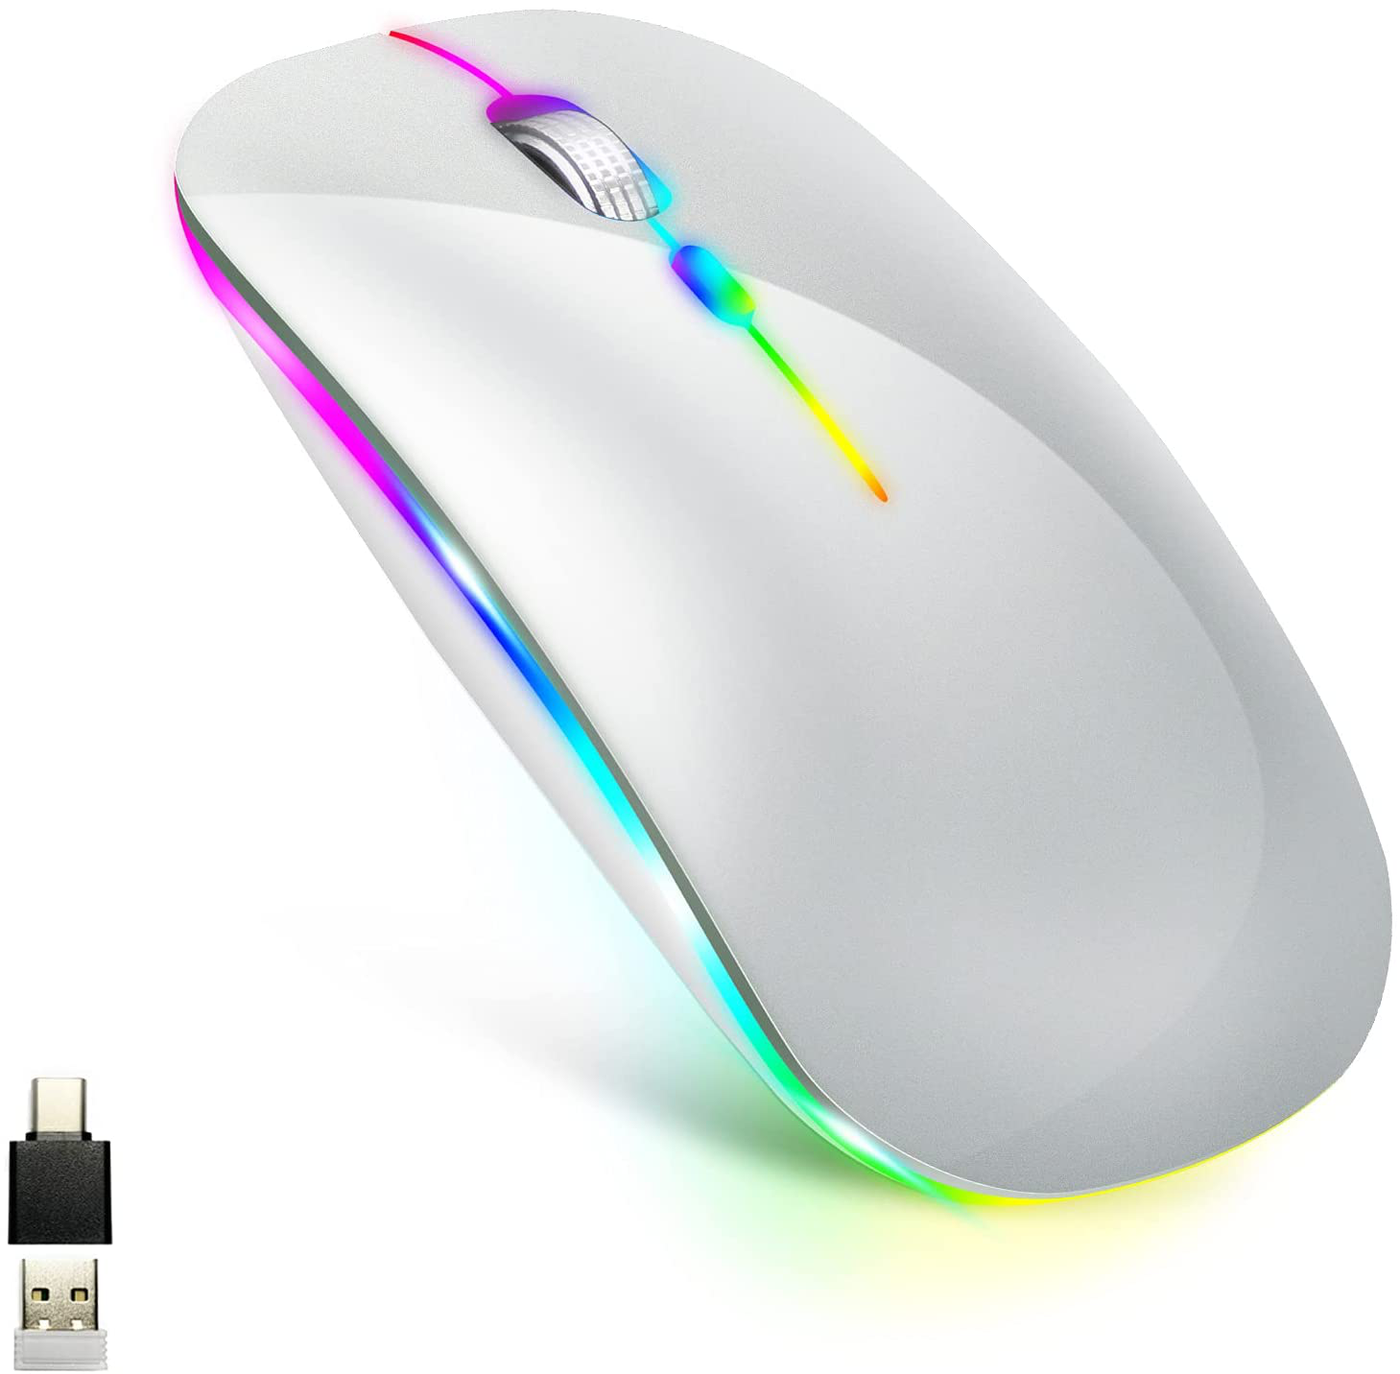 LED Wireless Mouse for MacBook air/MacBook pro/Laptops/Windows/Mac,Rechargeable Slim Silent Mouse 2.4G USB/Type-c Receiver,Rechargeable Wireless Mouse for MacBook/air/pro/mac/pc(White)